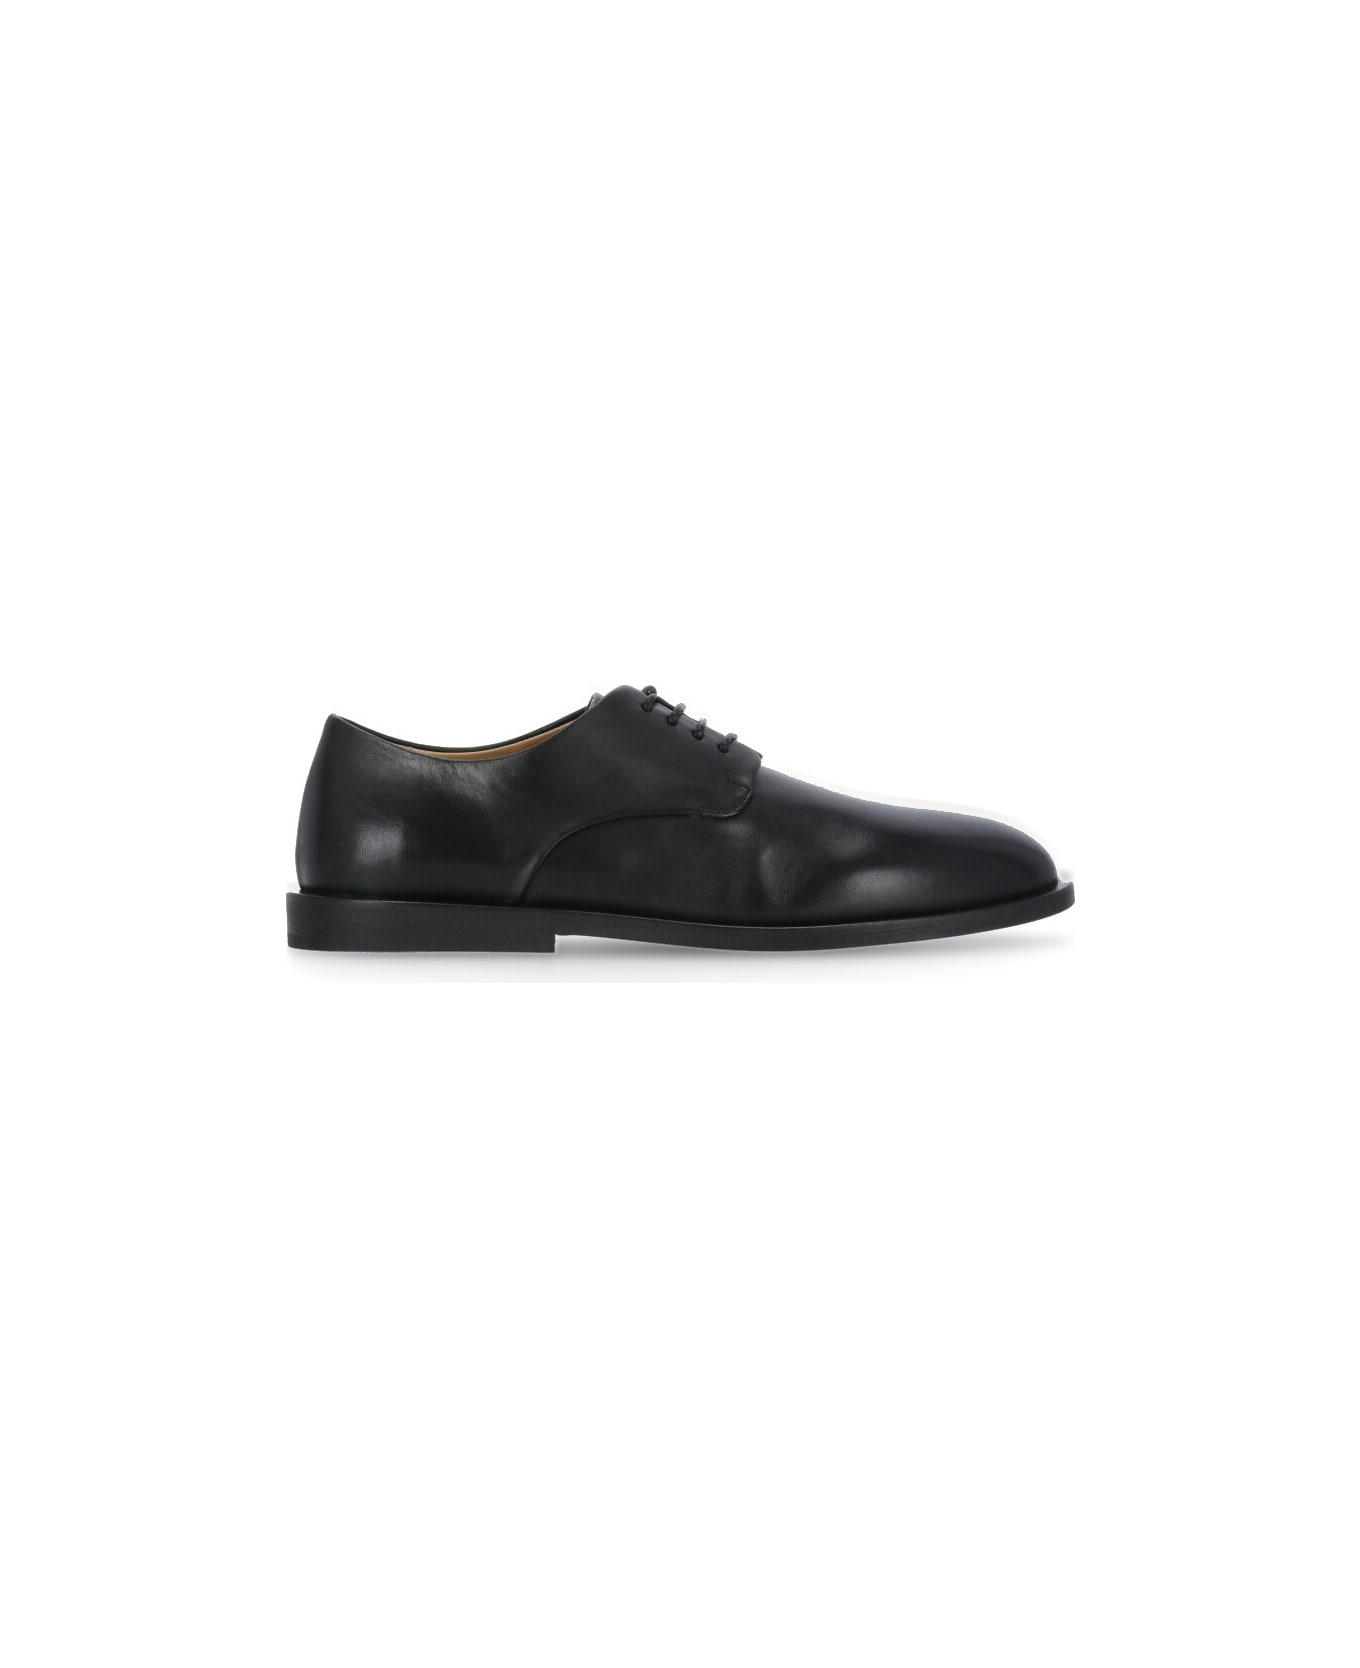 Marsell Mando Derdy Lace-up Shoes - Black